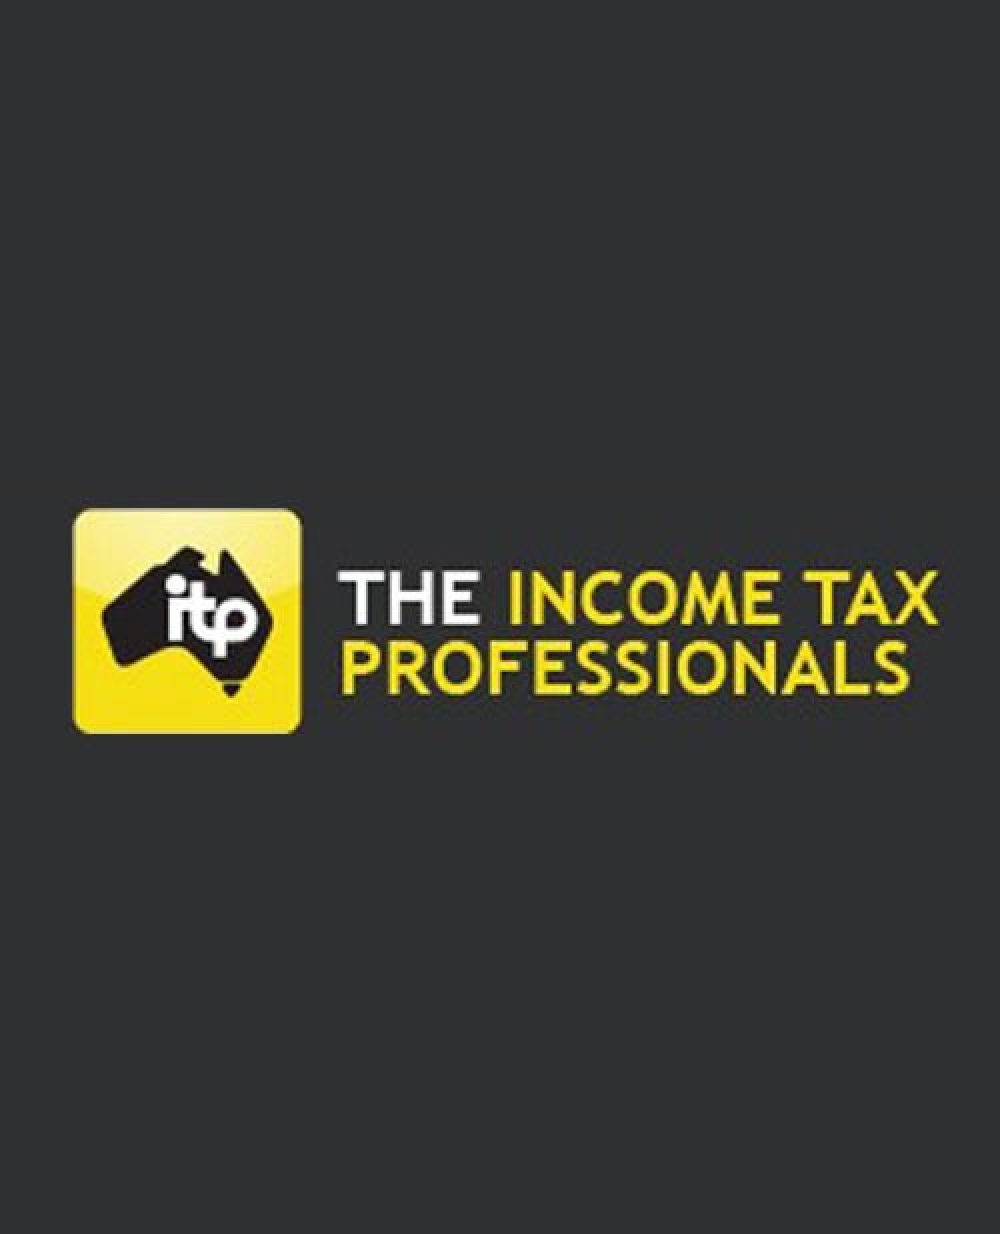 ITP The Income Tax Professionals - Gawler Business Development Group